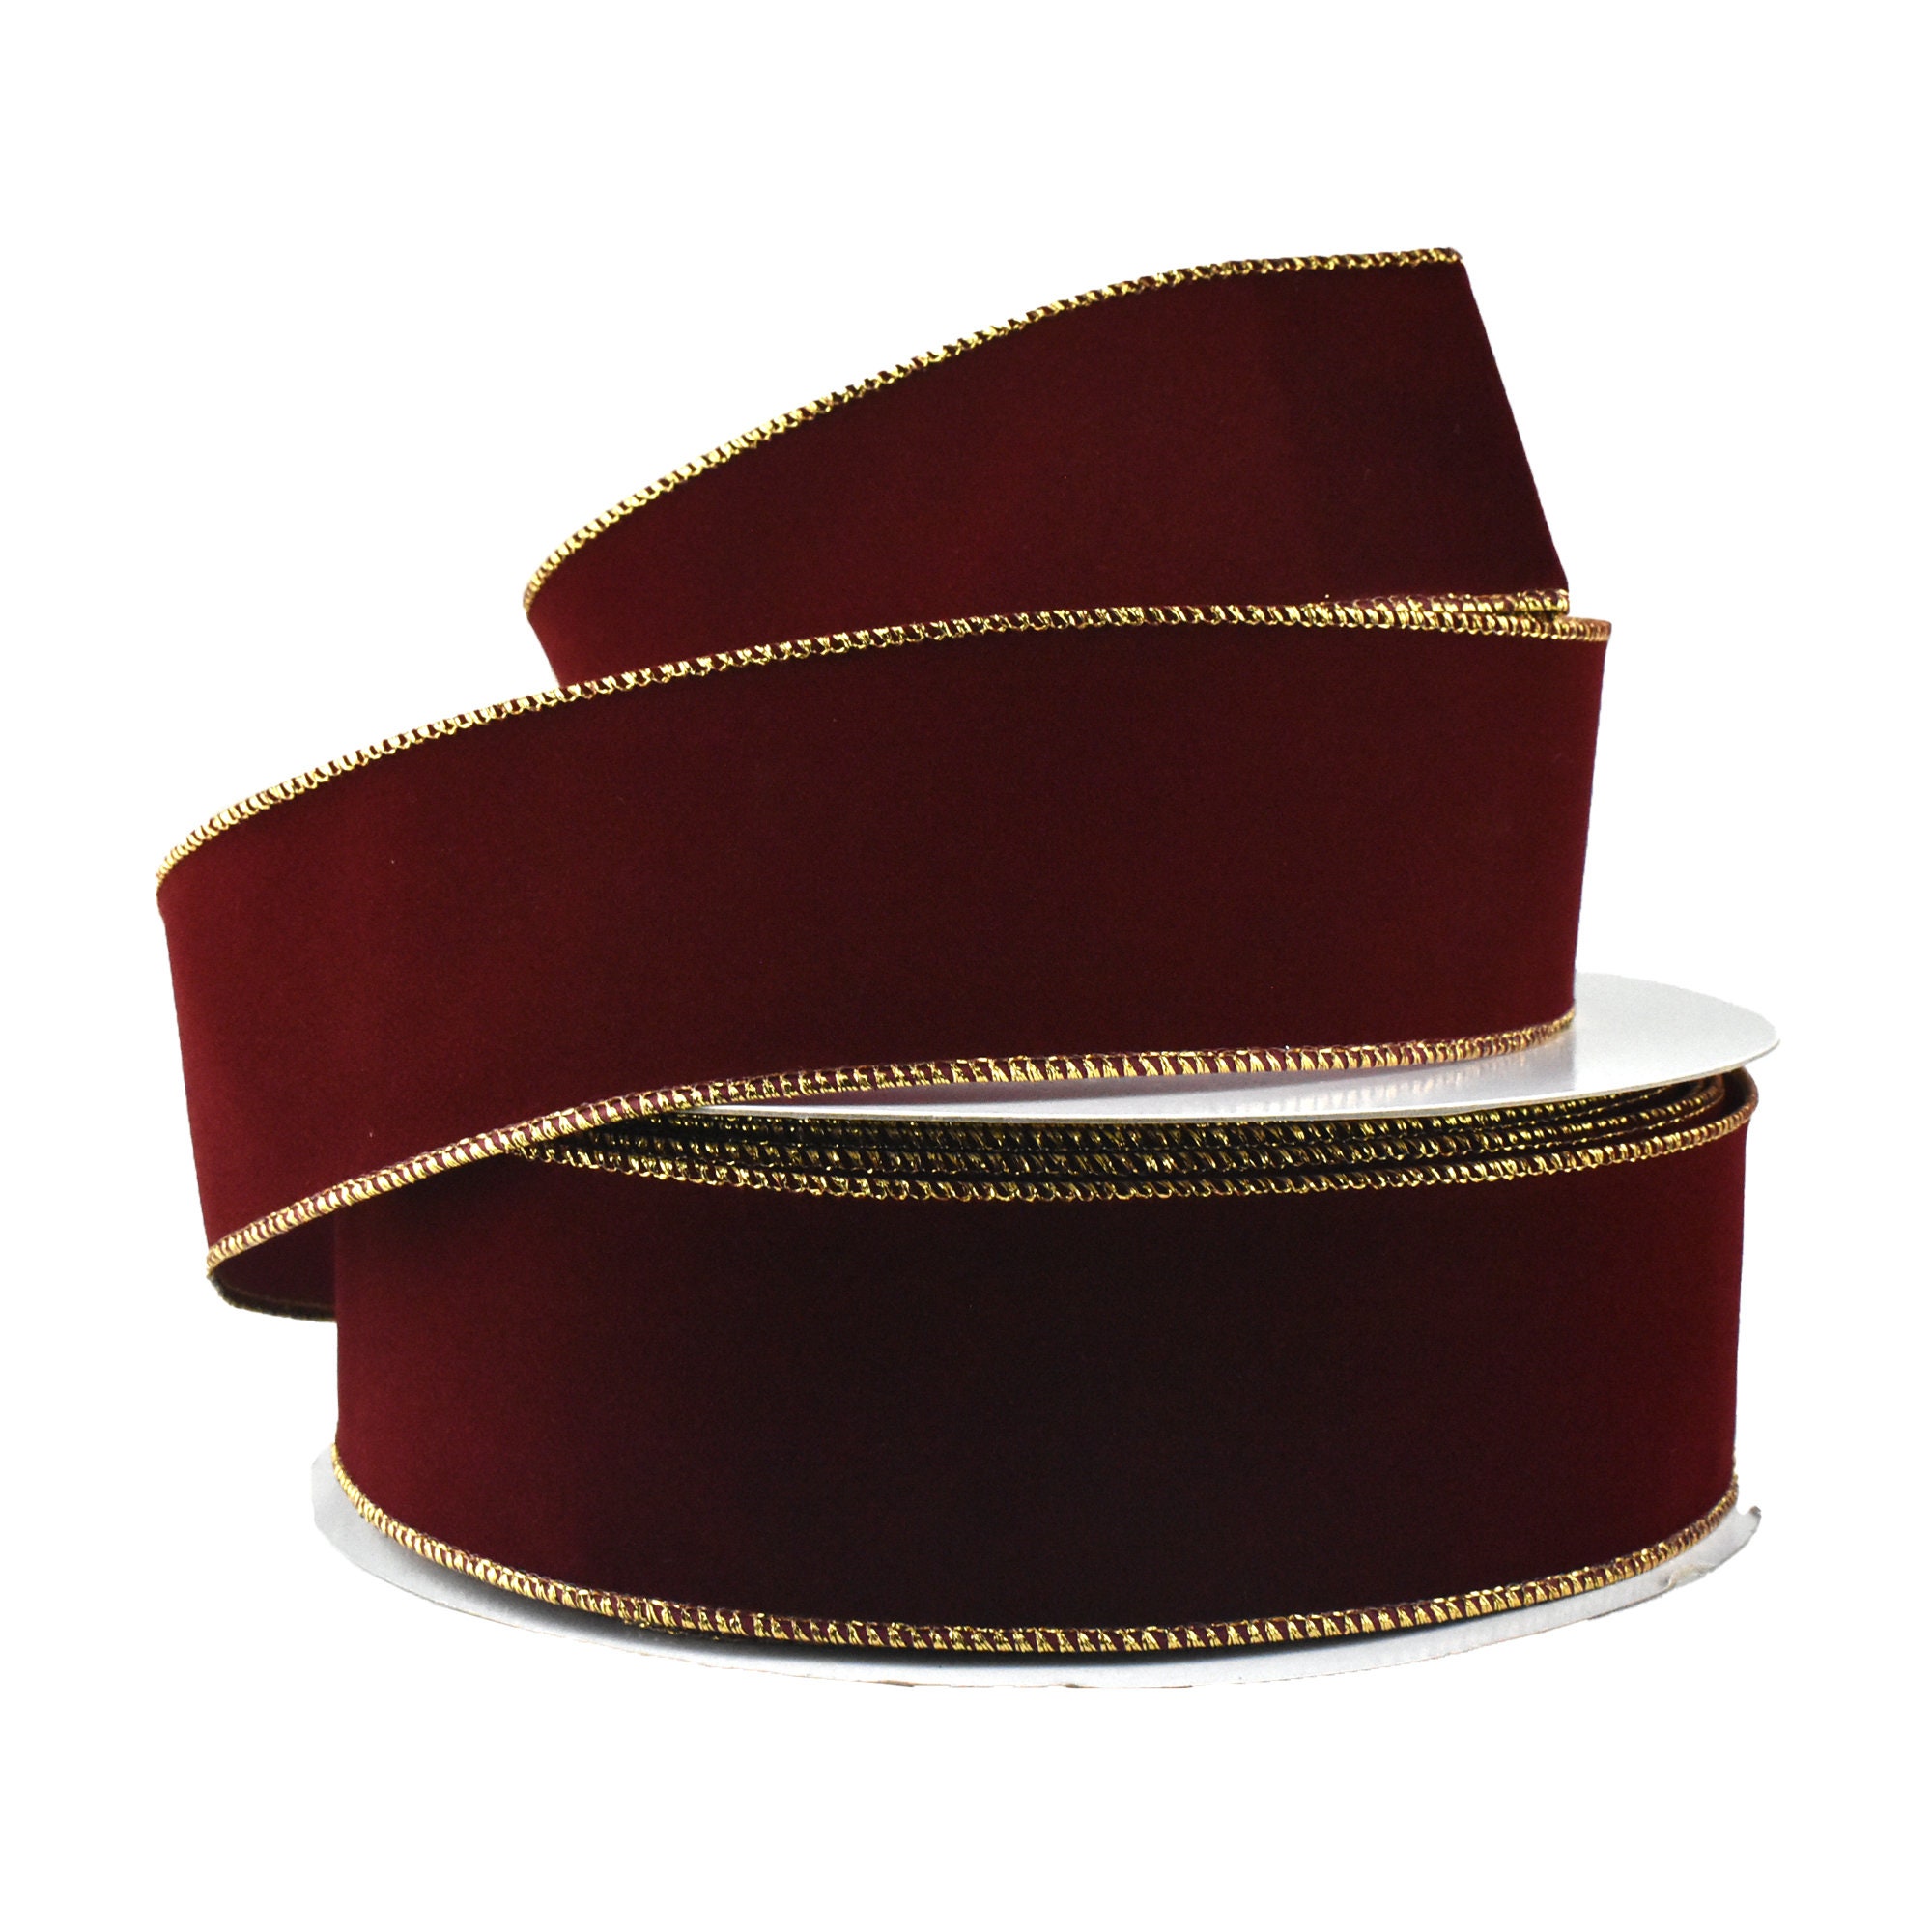 DINDOSAL Burgundy Velvet Ribbon Wired 1.5 x 10 Yards Burgundy Christmas  Wired Ribbon with Gold Metallic Back Maroon Gold Wired Ribbon for Wreaths